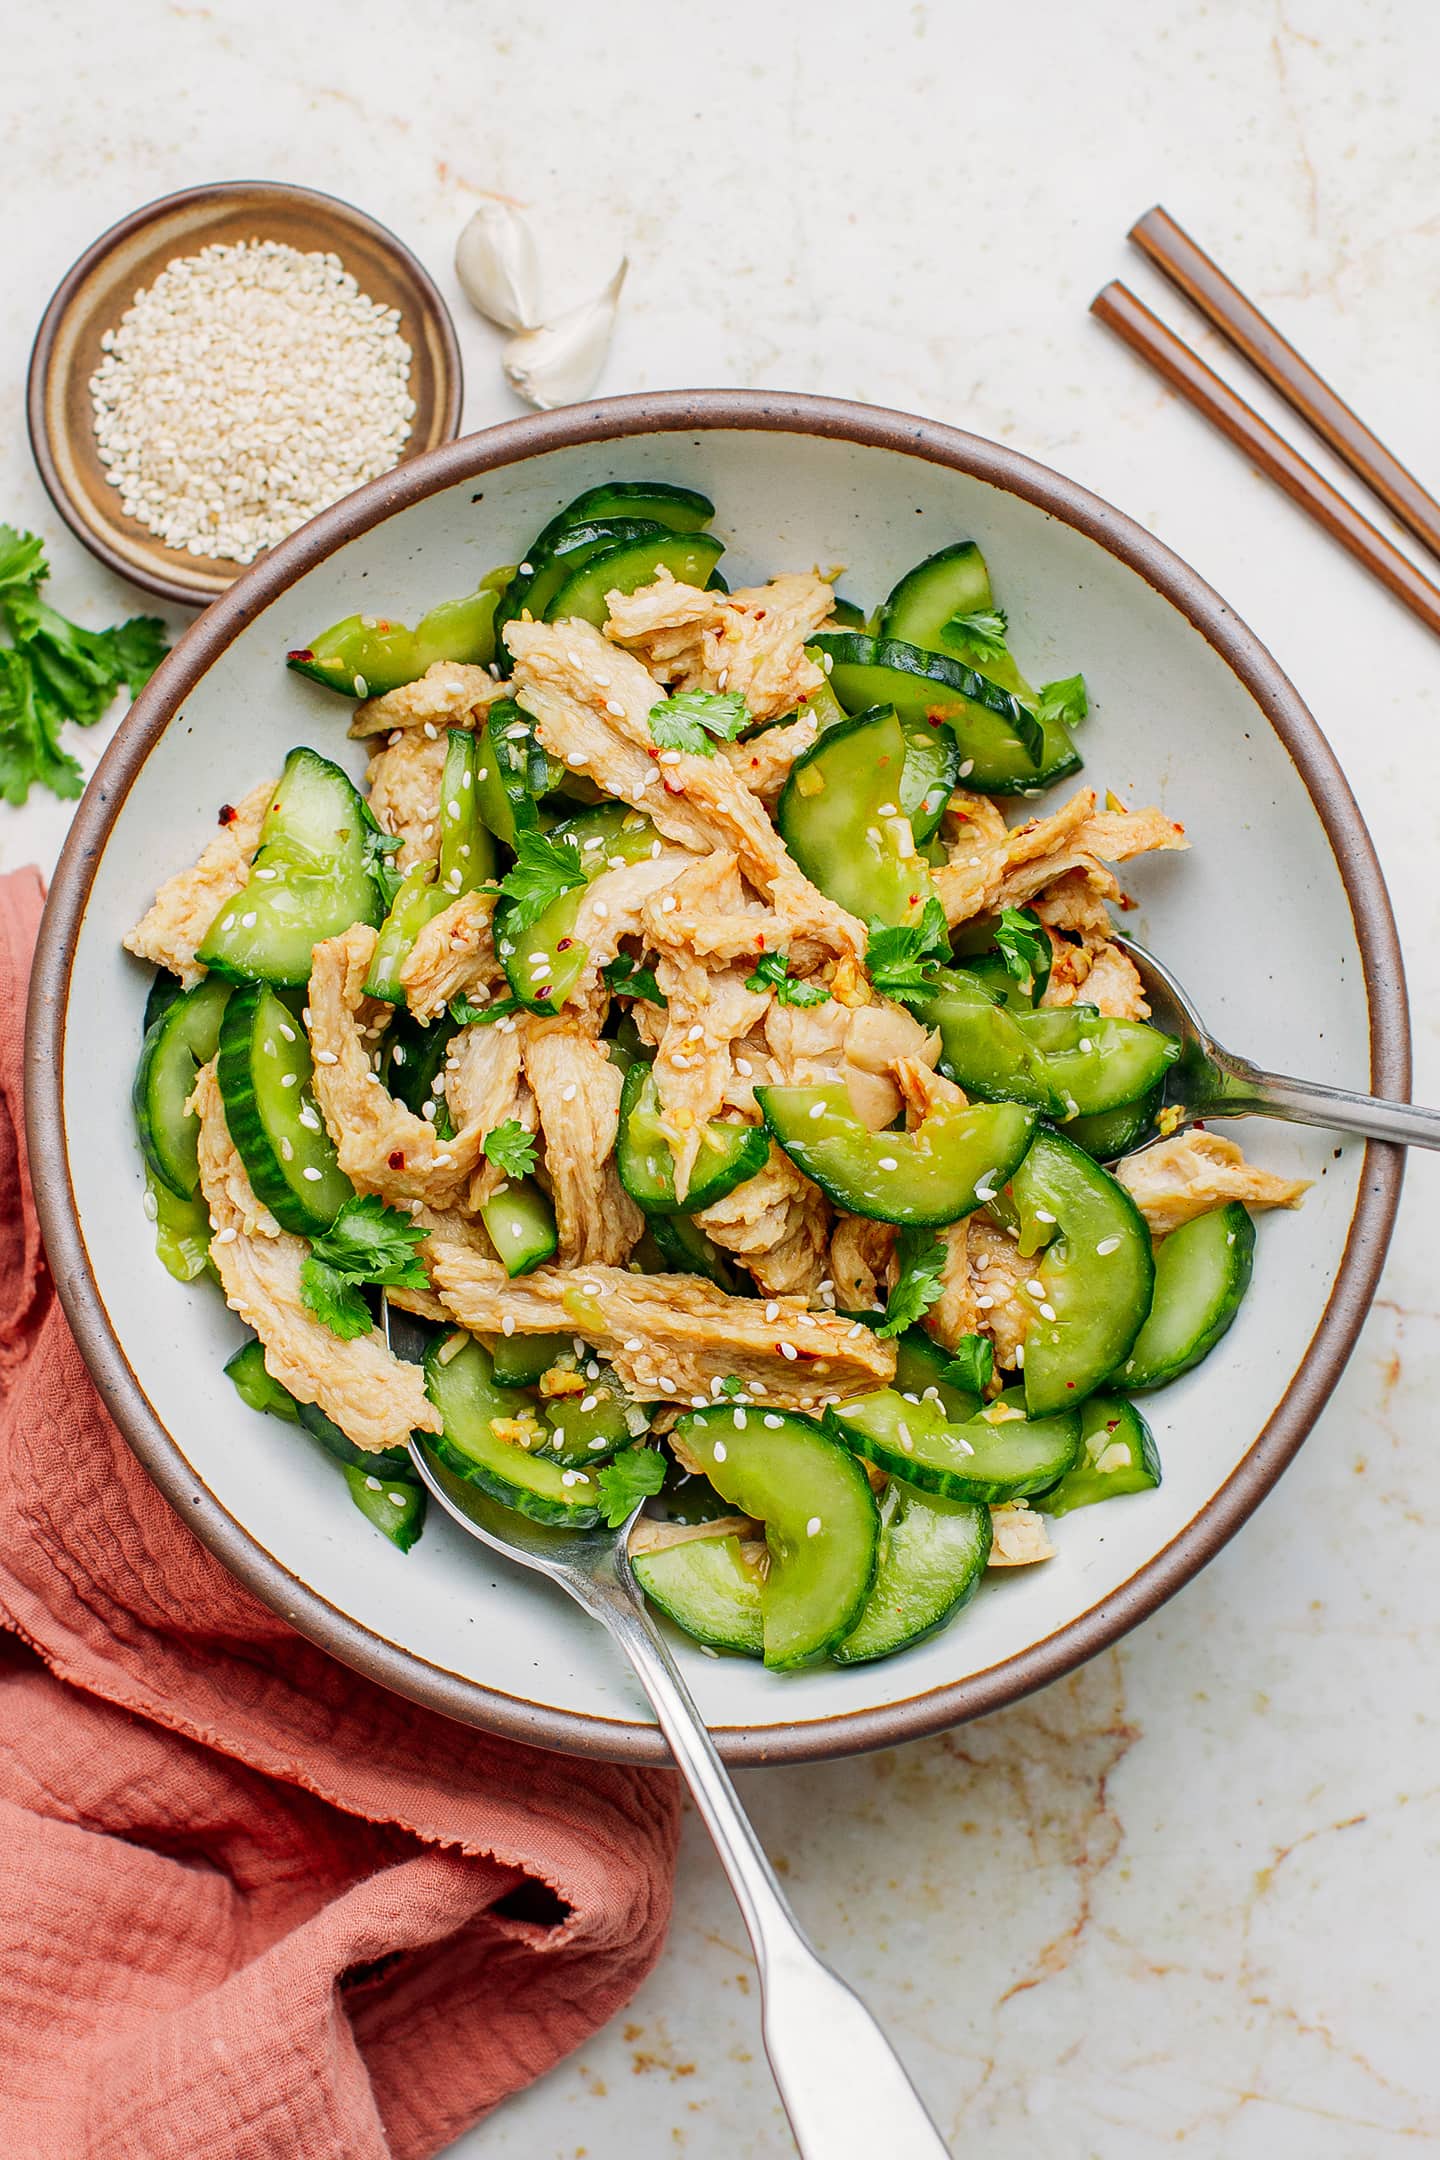 Vegan chicken salad with cucumber and sesame seeds.